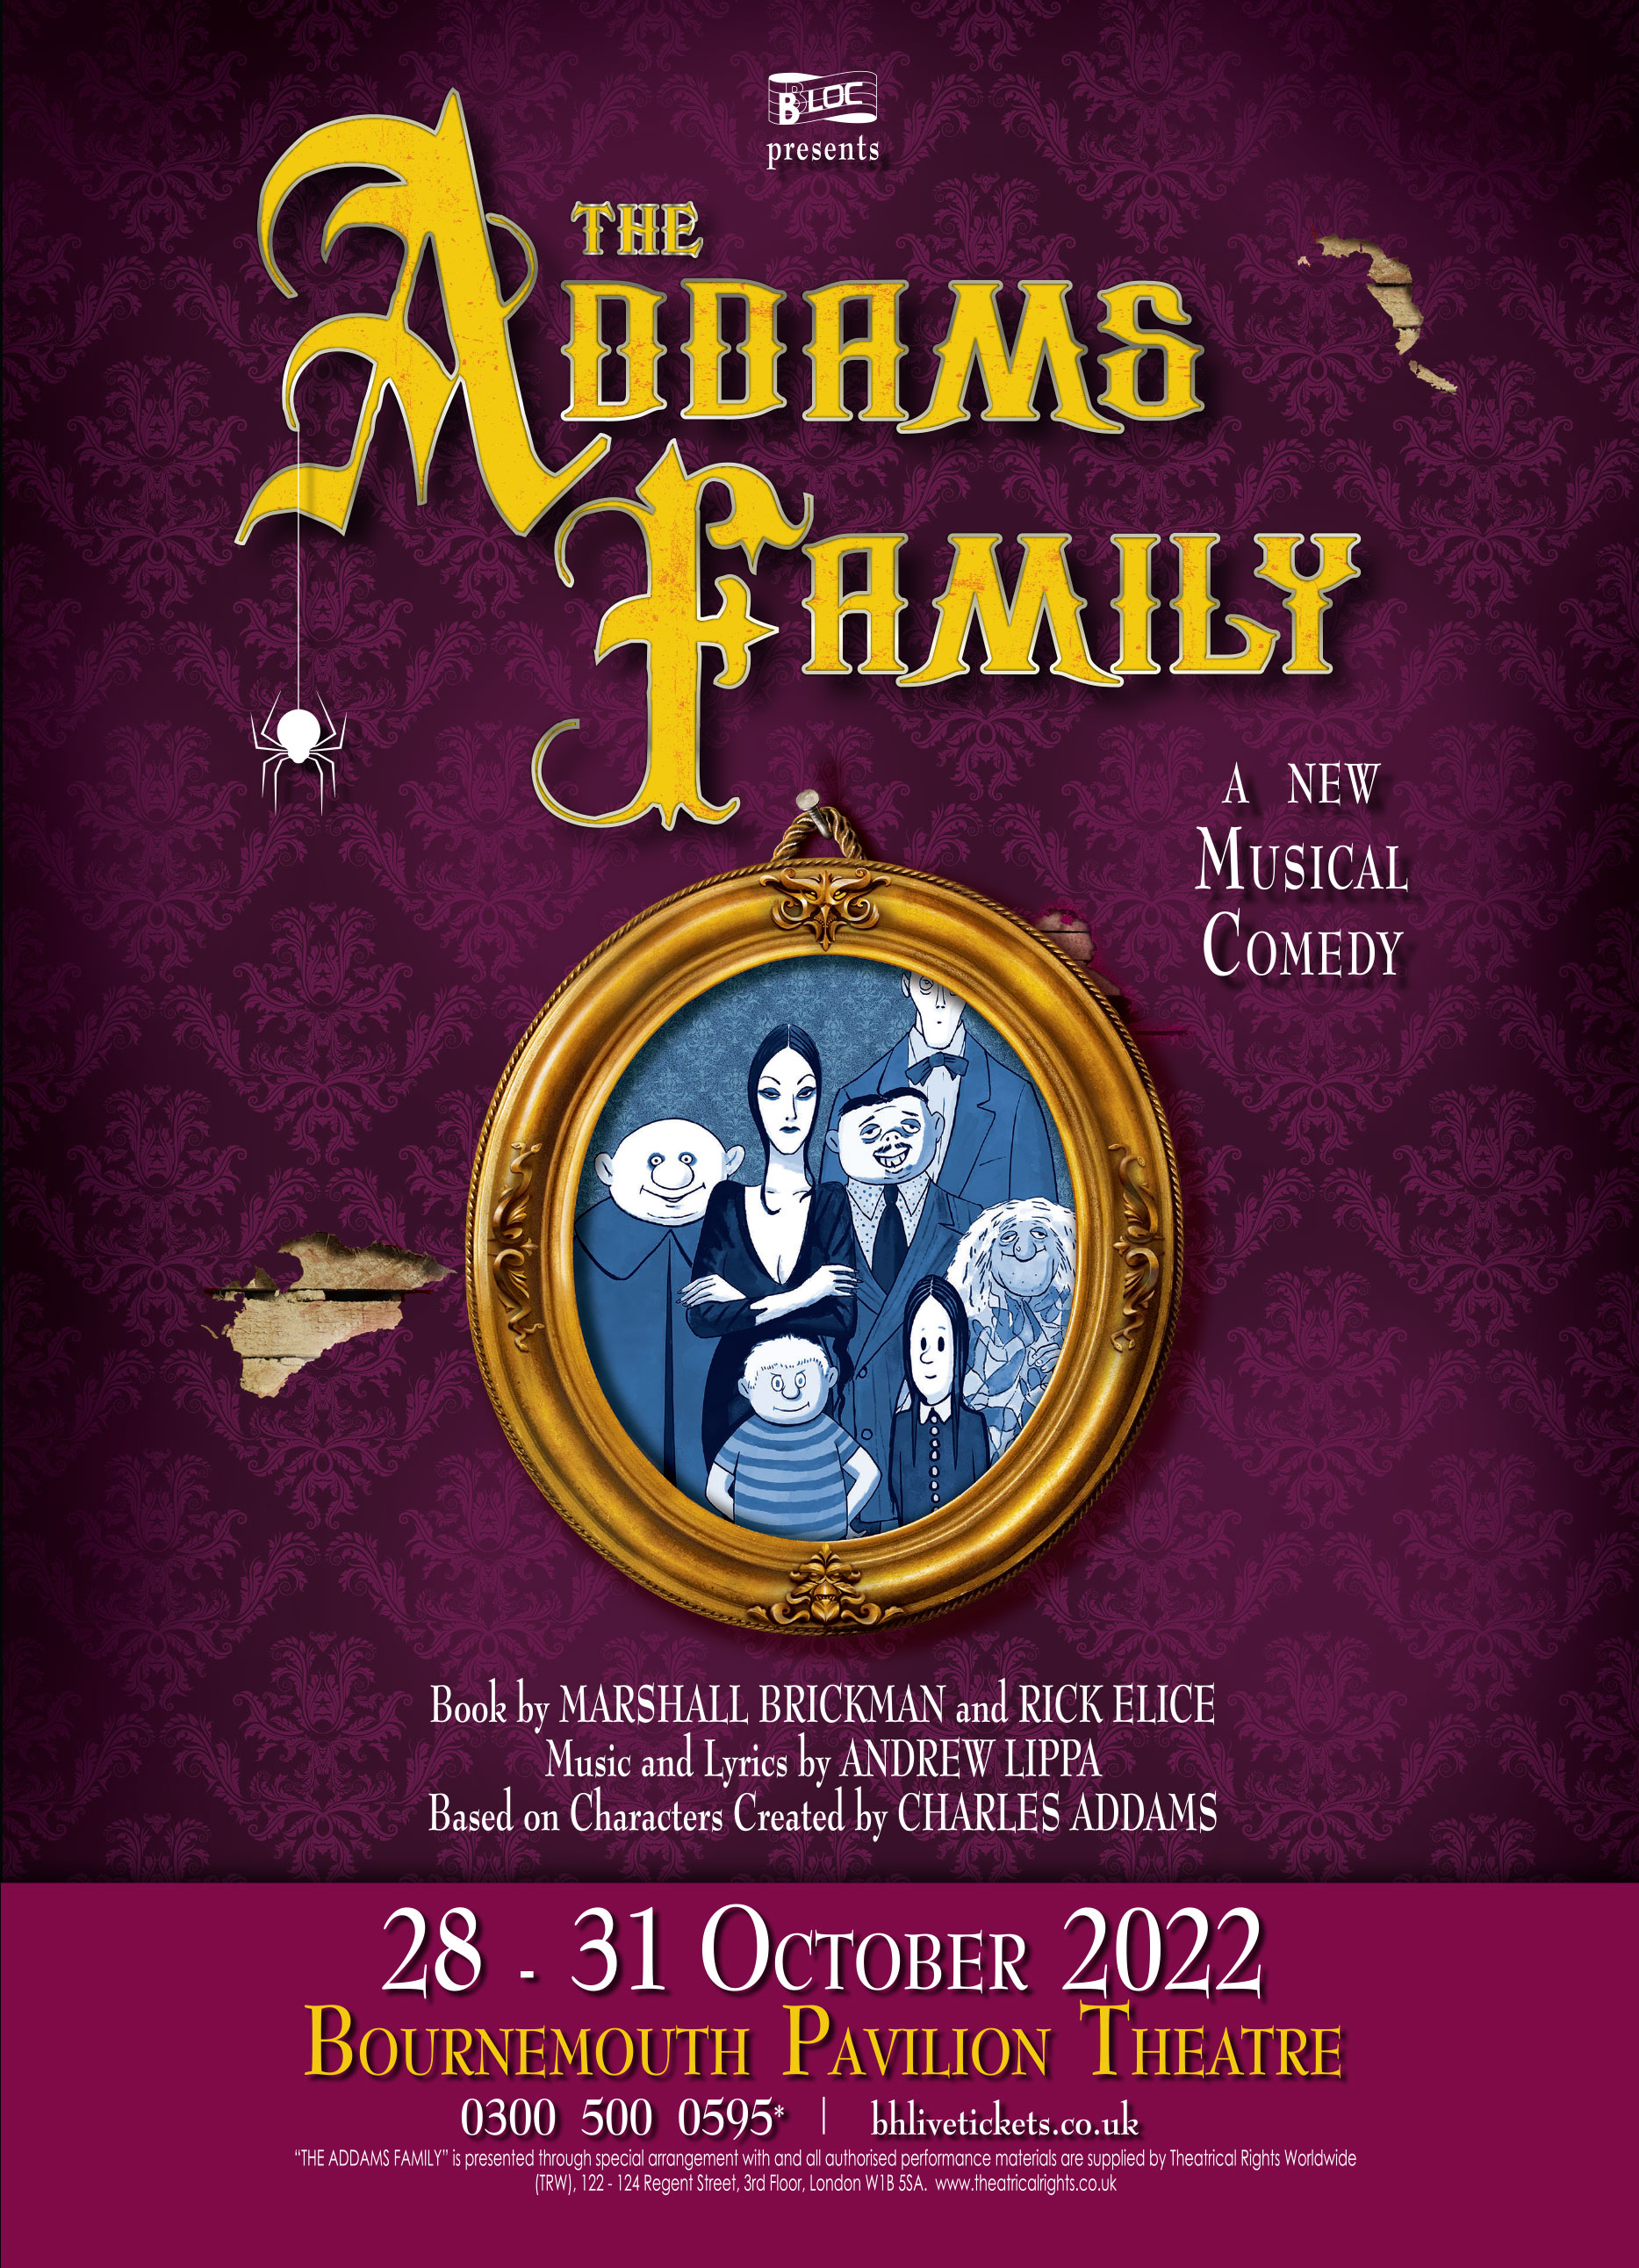 THe Addams Family A New Musical Comedy